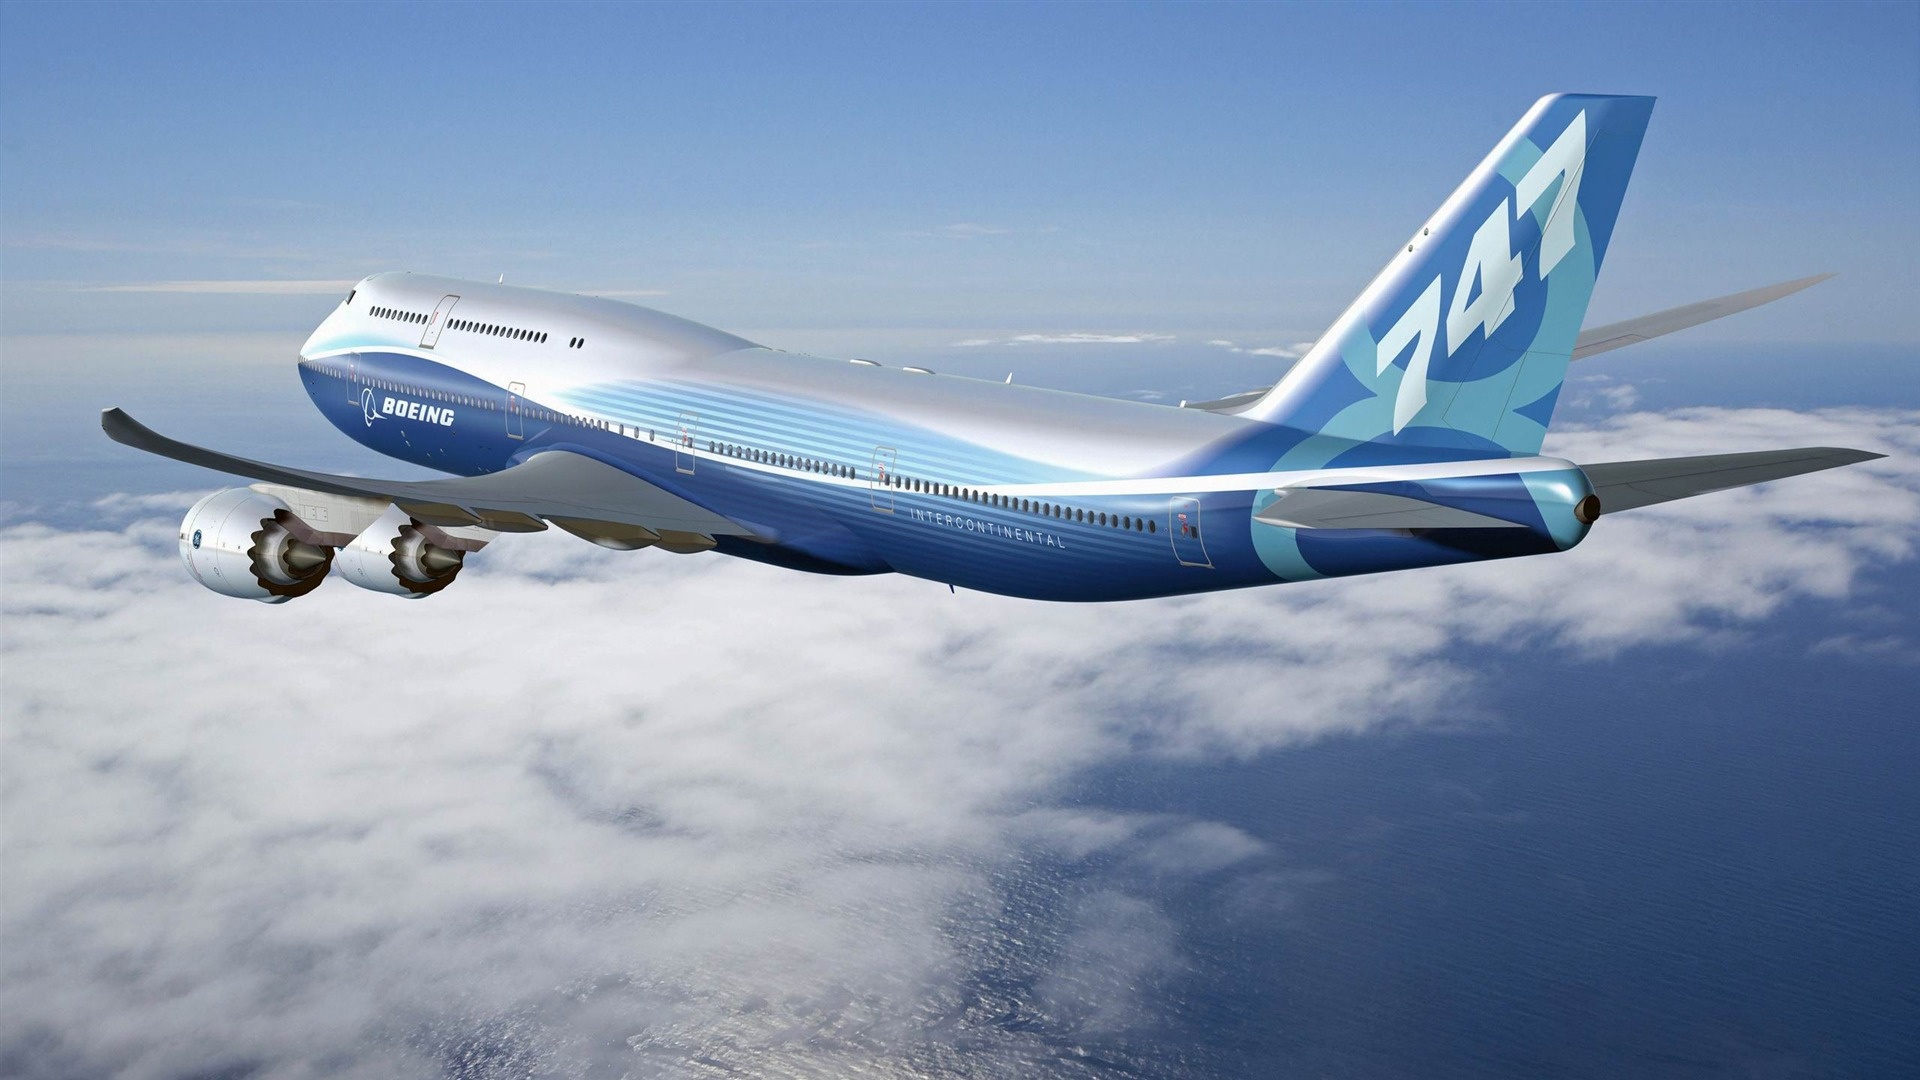 Aircraft: Boeing 747, Jet, Enable it to fly in the sky. 1920x1080 Full HD Wallpaper.